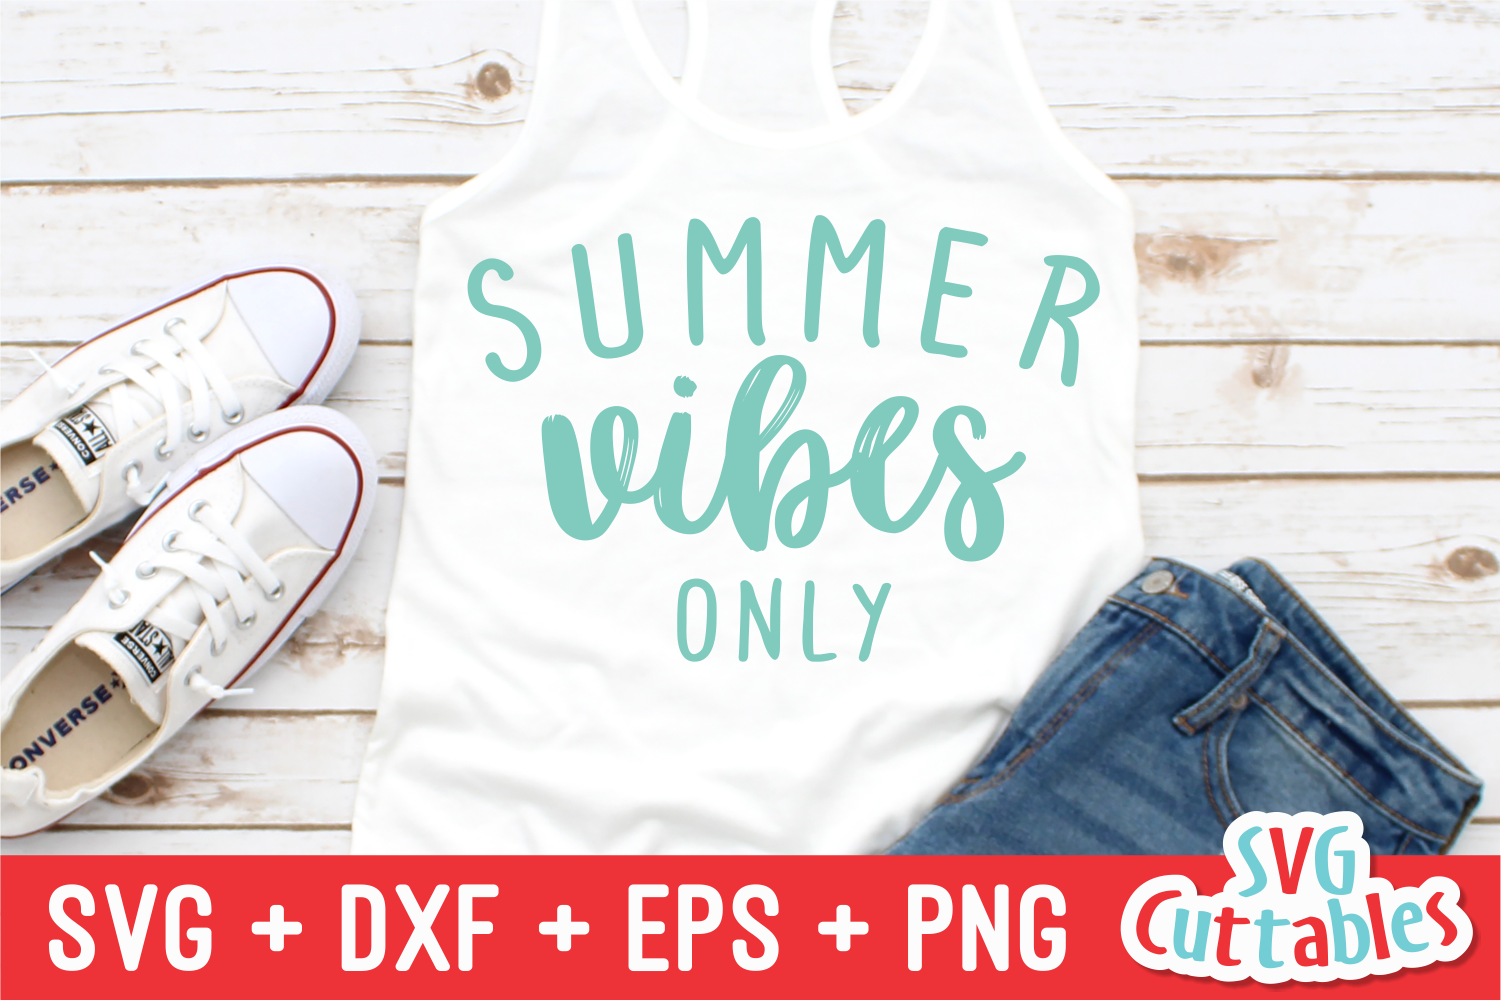 Download Summer Vibes Only Svg Cut File By Svg Cuttables Thehungryjpeg Com